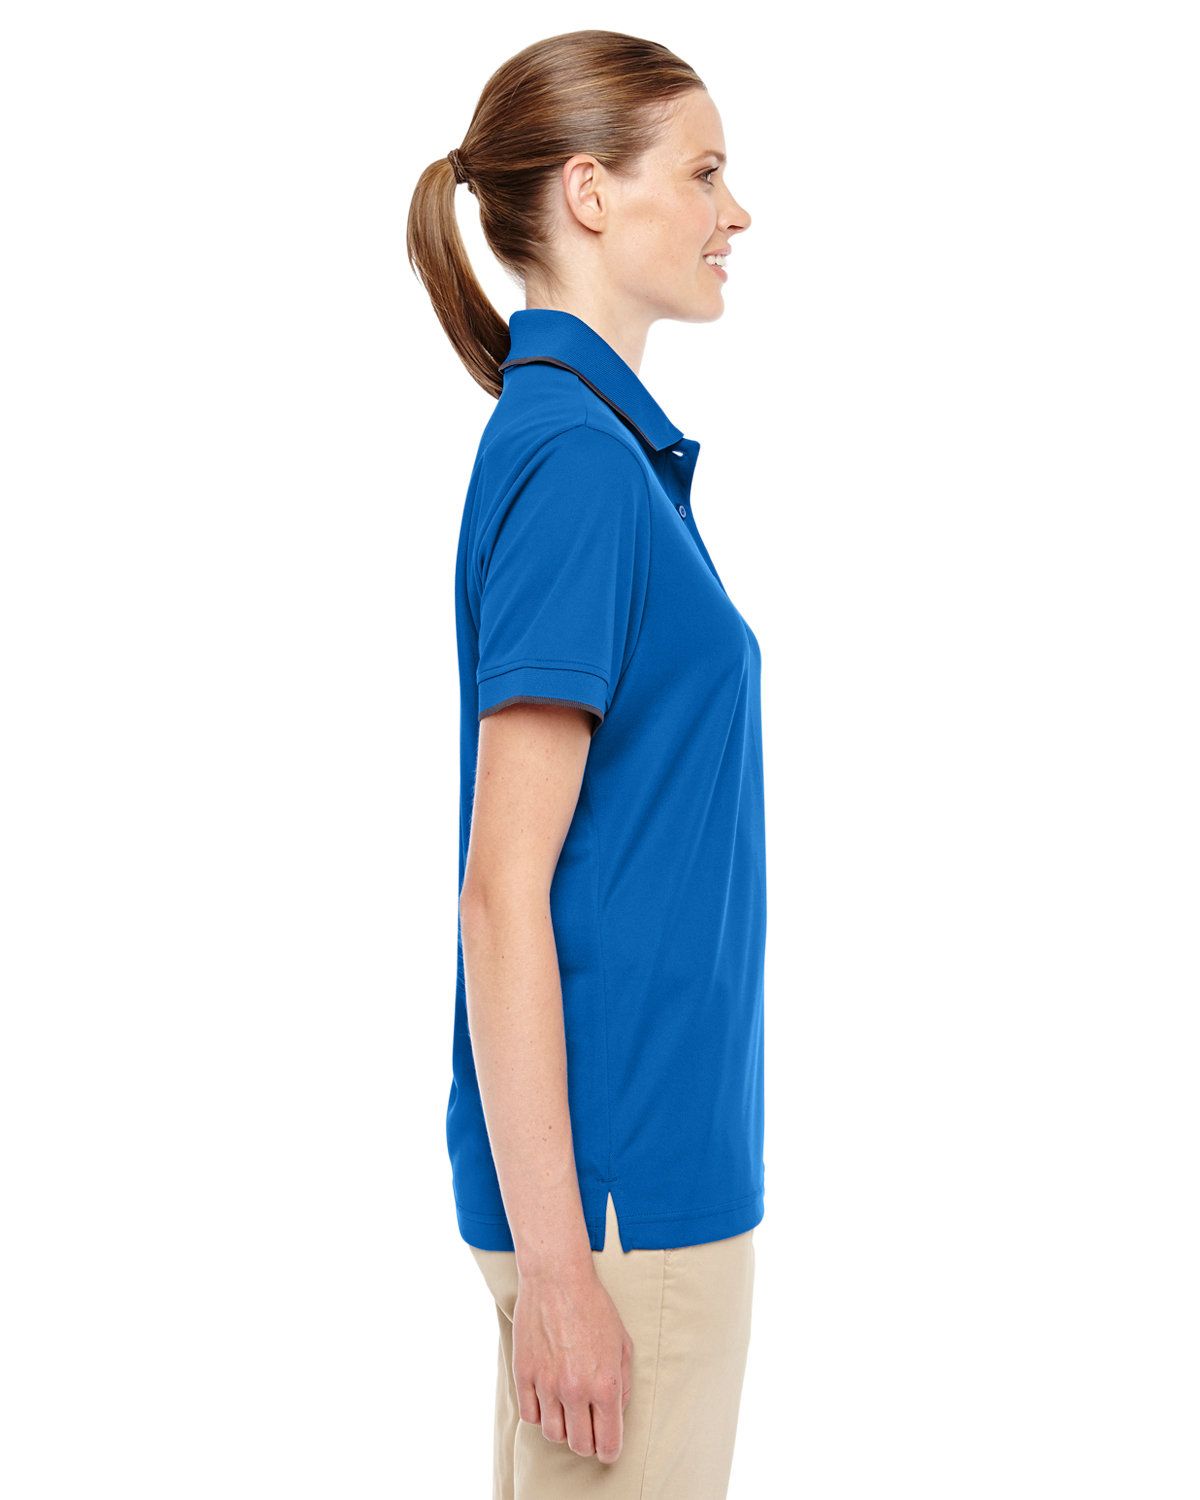 'Core365 78222 Women's Motive Performance Pique Polo with Tipped Collar'